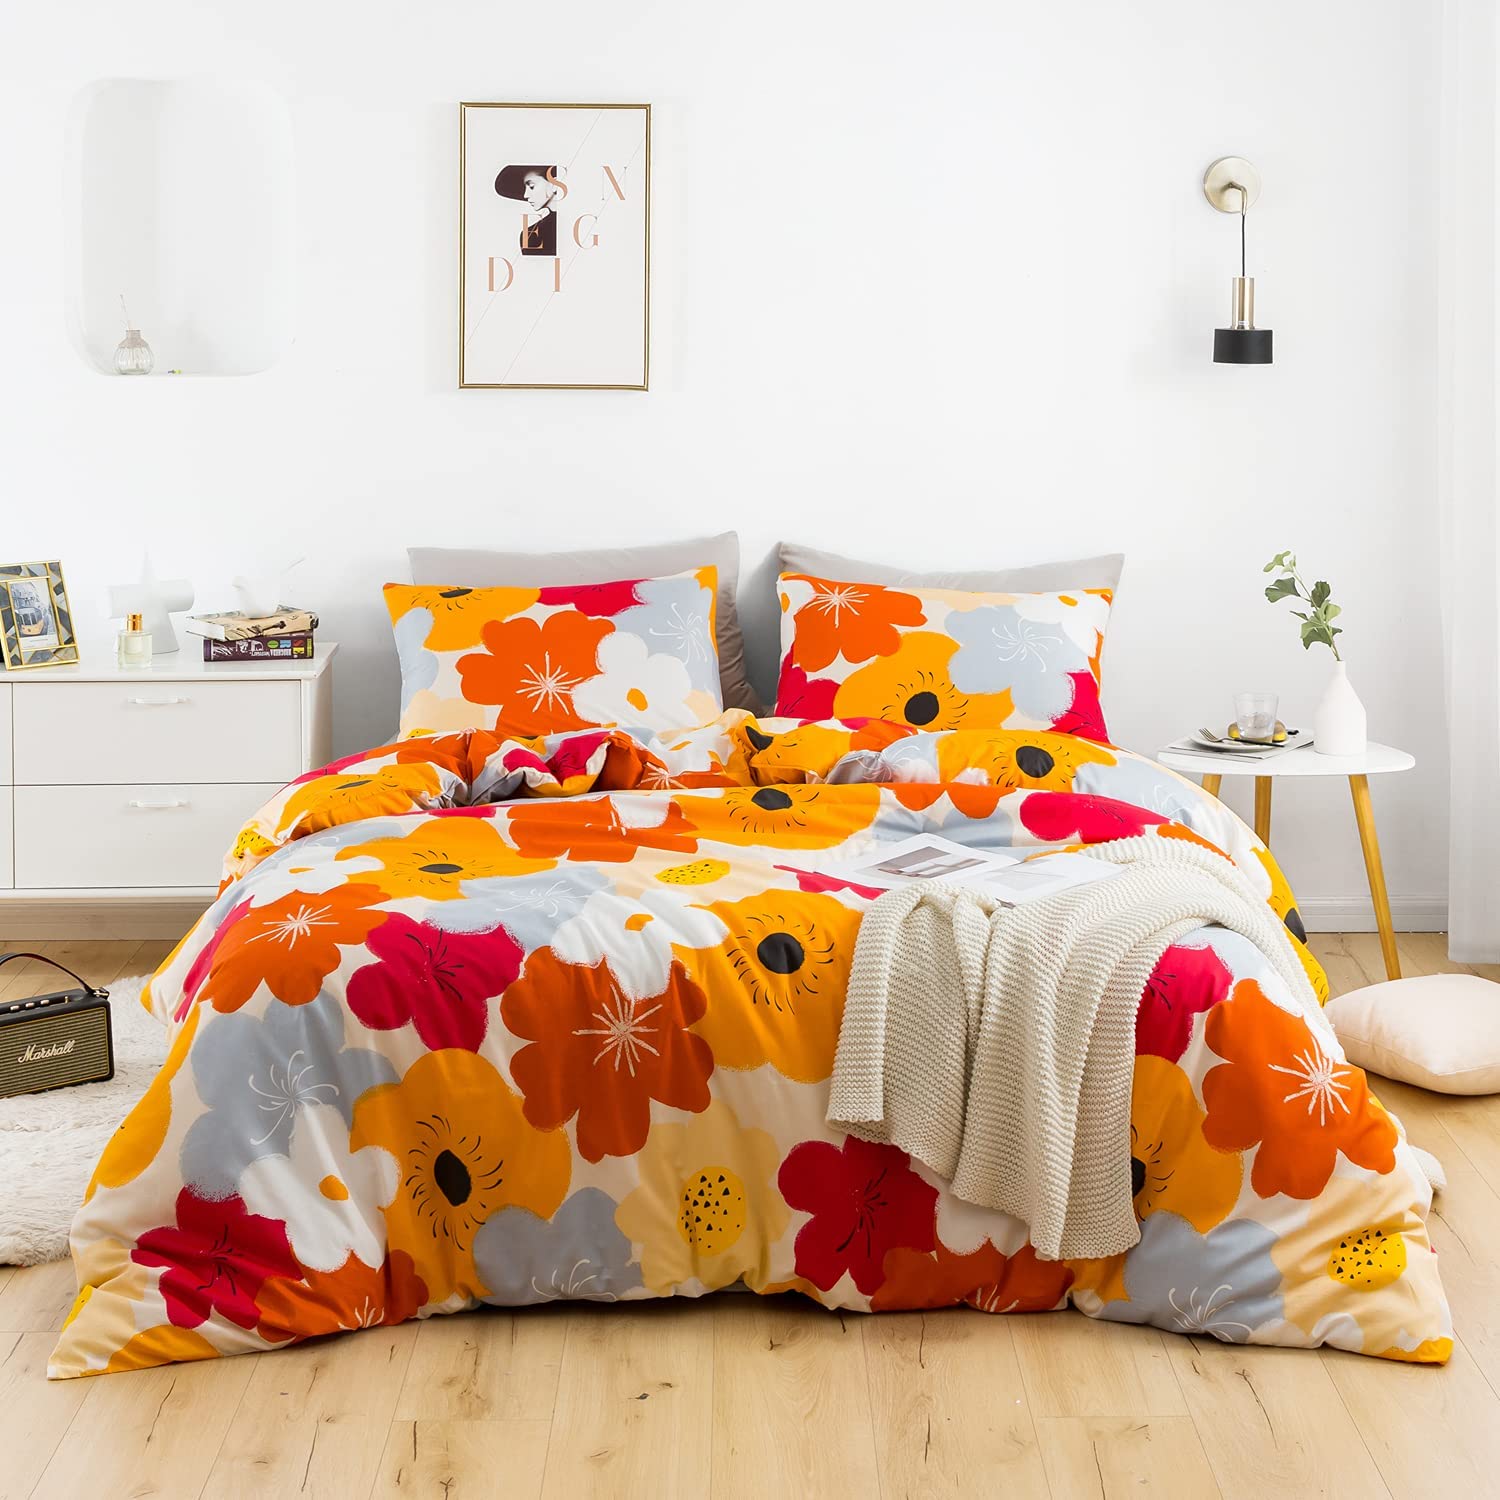 Price:$56.99  Duvet Cover Set 100% Cotton King Size Vibrant Orange Floral Bedding Cover 3 Pieces Set 1 Flowers Duvet Cover 2 Pillowcases Red Botanical Comforter Cover with Zipper Ties Ultra Soft Breathable : Home & Kitchen